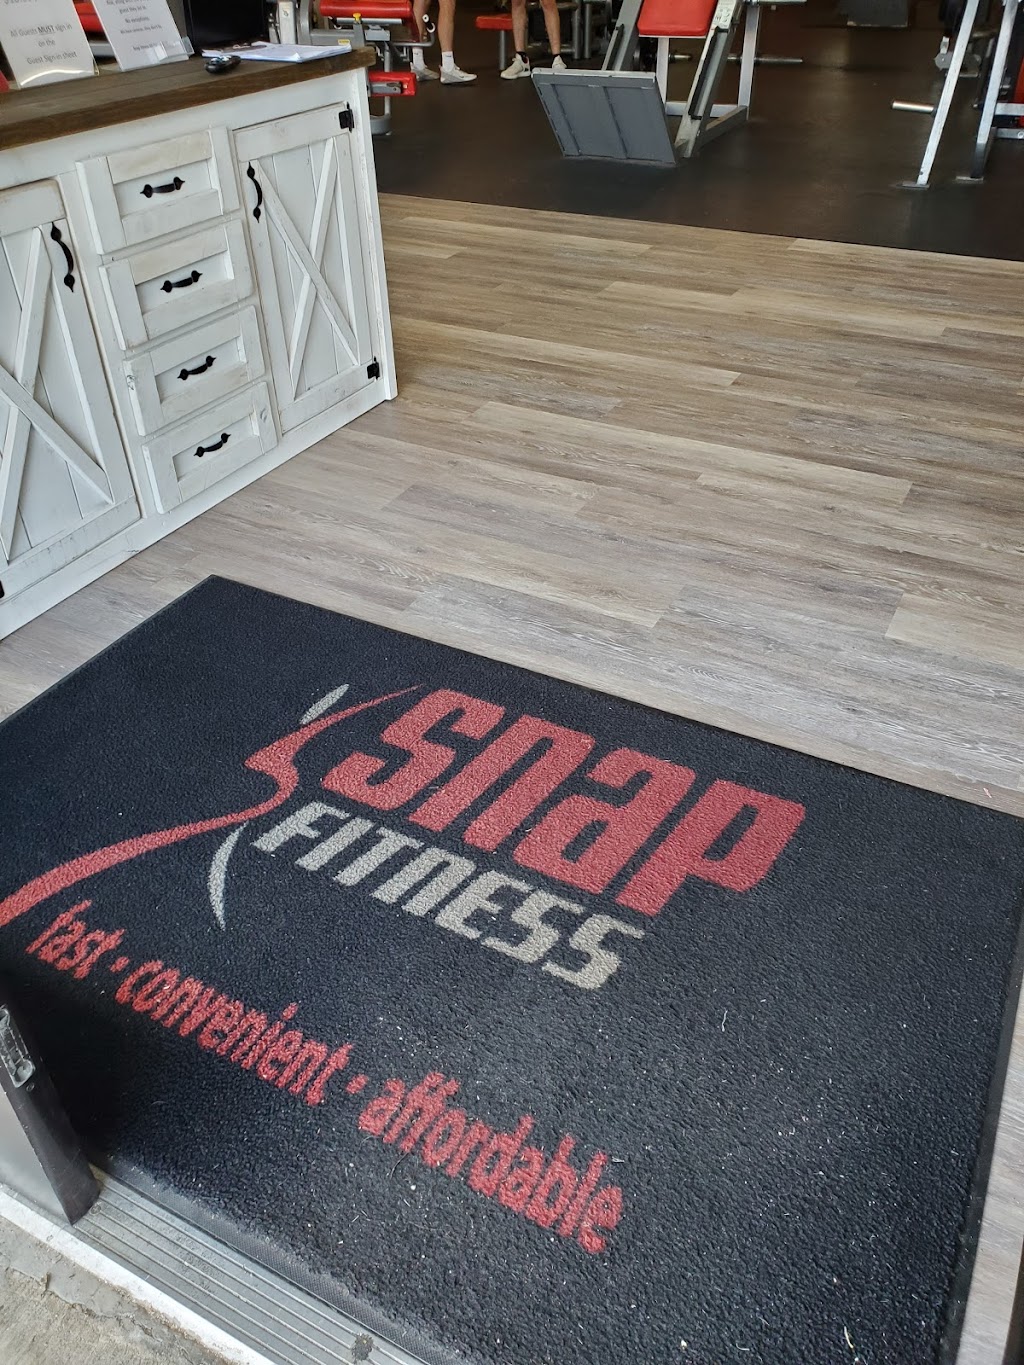 Snap Fitness Central/Greenwell Springs | 14485 Greenwell Springs Rd Suite A, Greenwell Springs, LA 70739, USA | Phone: (225) 261-5008